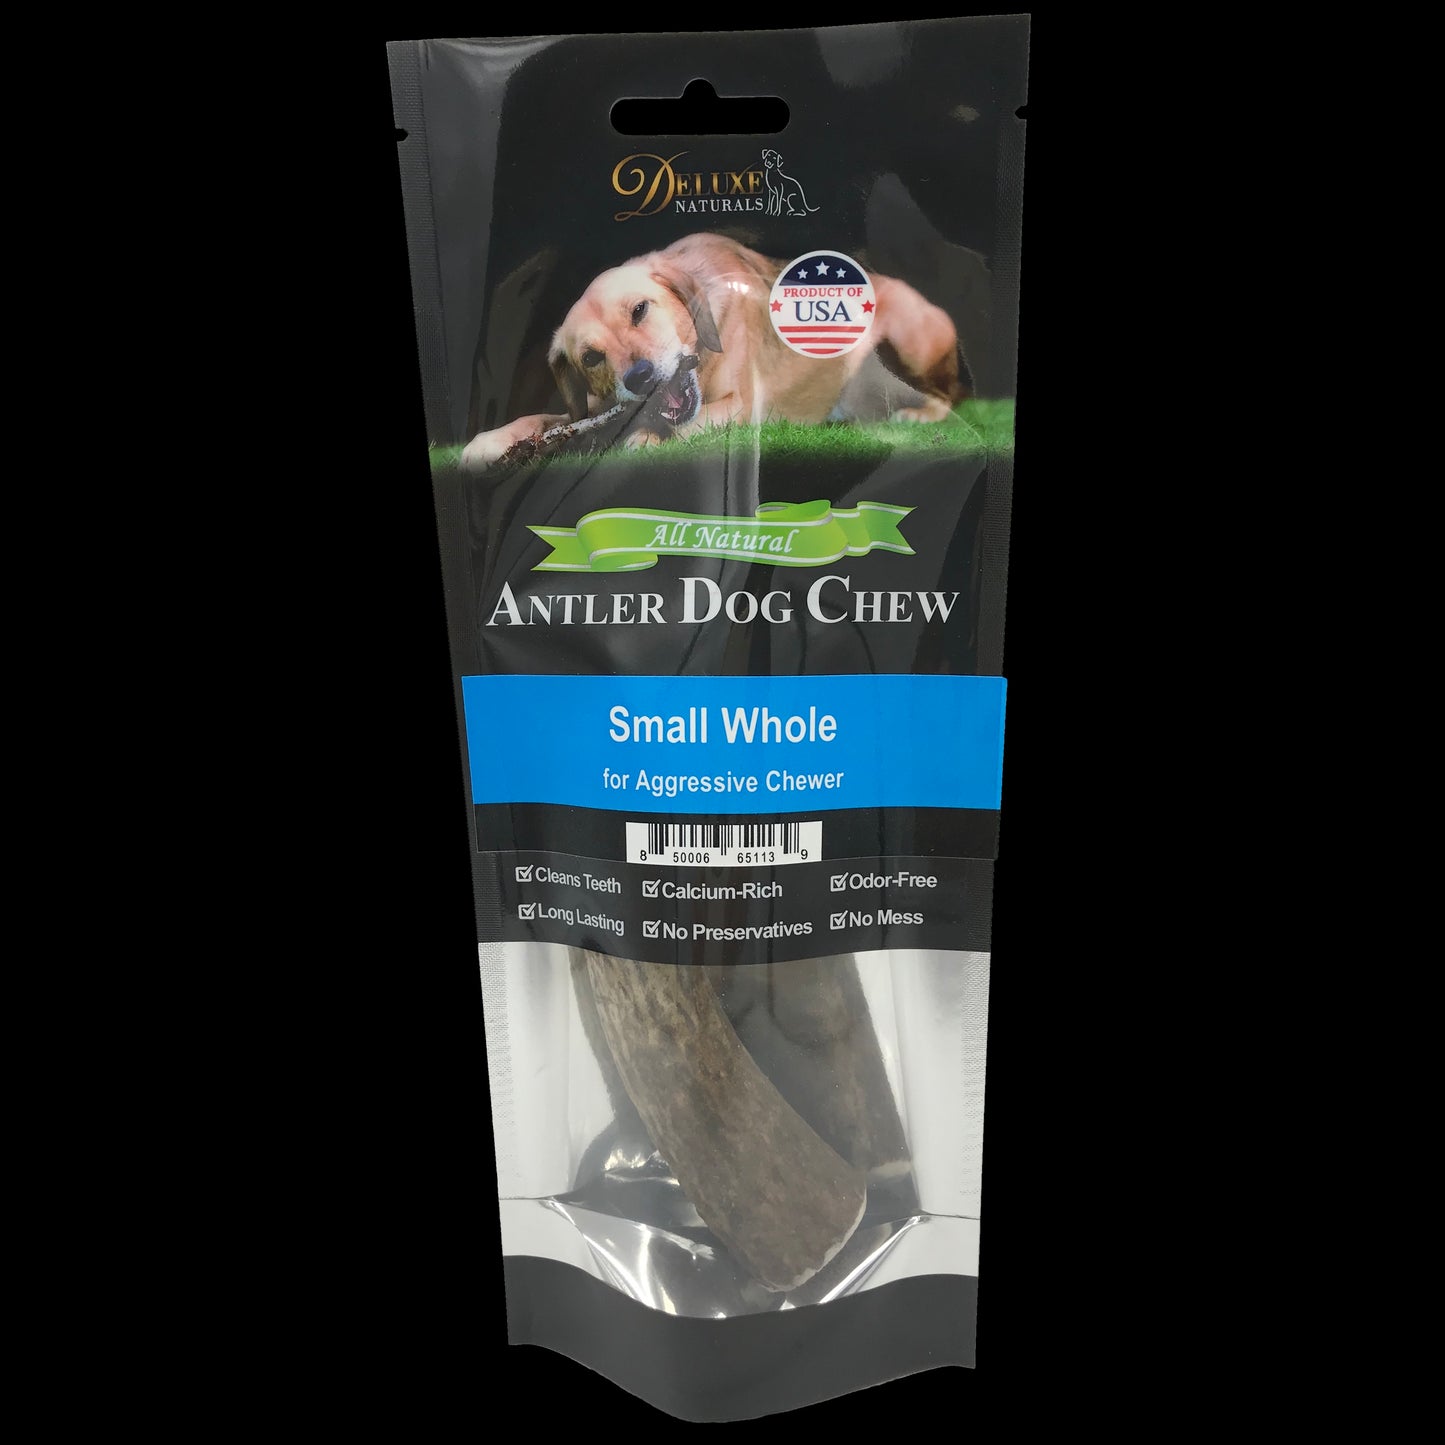 Deluxe Naturals Elk Antler Dog Chew - Small Whole